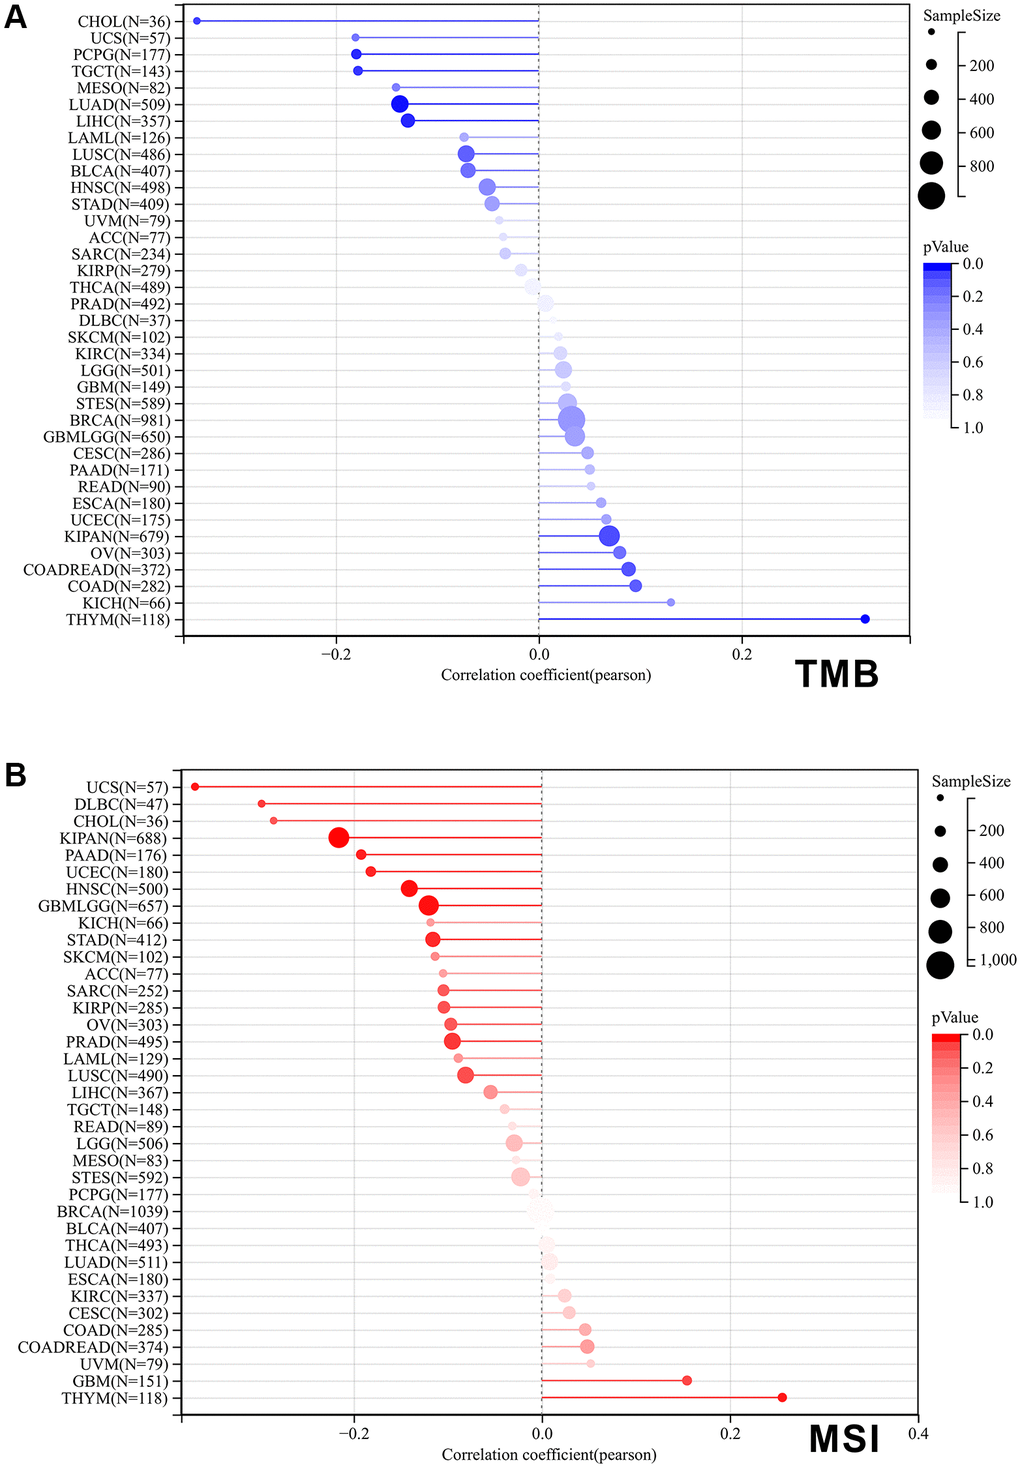 Correlation of SPIB expression with tumor mutational load (TMB) and microsatellite instability (MSI) in pan-cancer. (A) The bar graph represents the correlation between SPIB expression and TMB in pan-cancer. (B) The bar graph represents the correlation between SPIB expression and MSI in pan-cancer. P values are from Spearman's correlation analysis.